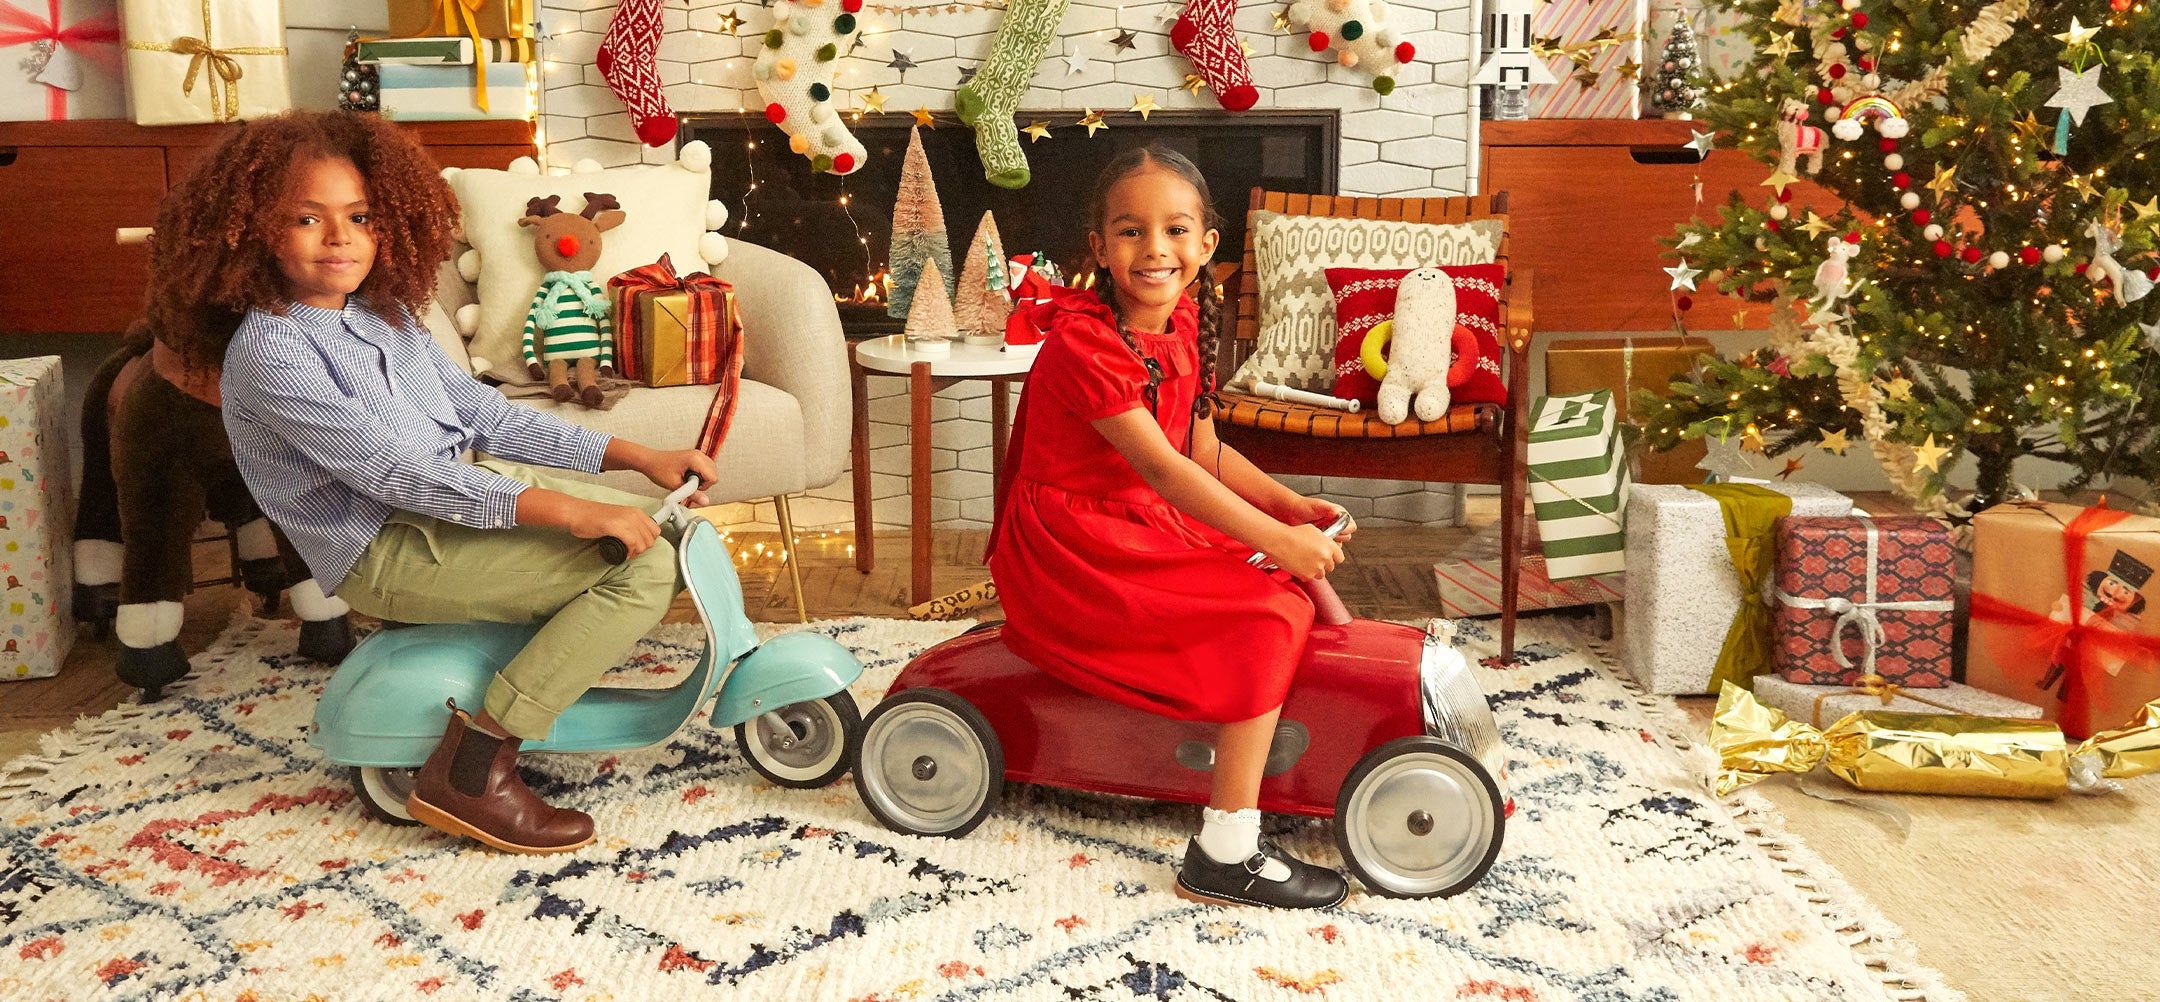 two children in a living room decorated with Christmas gifts and decor and playing with ride-on toys